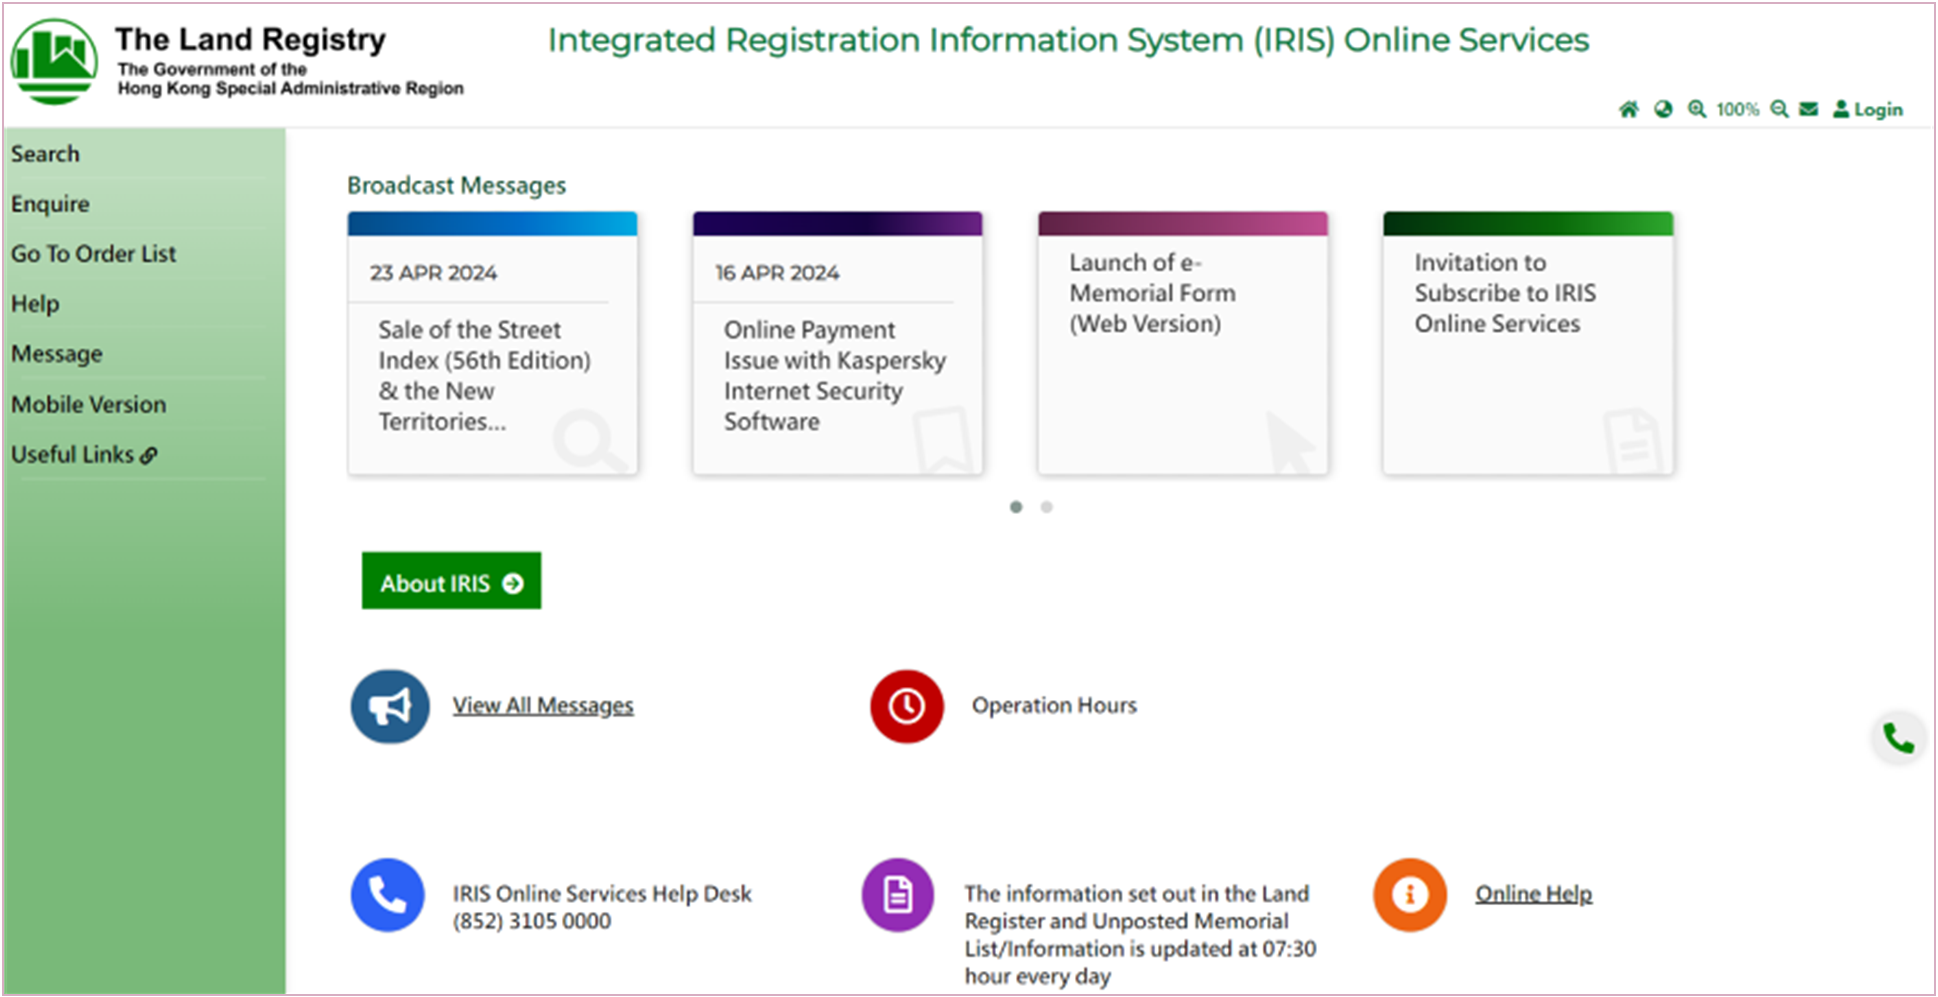 Homepage of IRIS Online Services